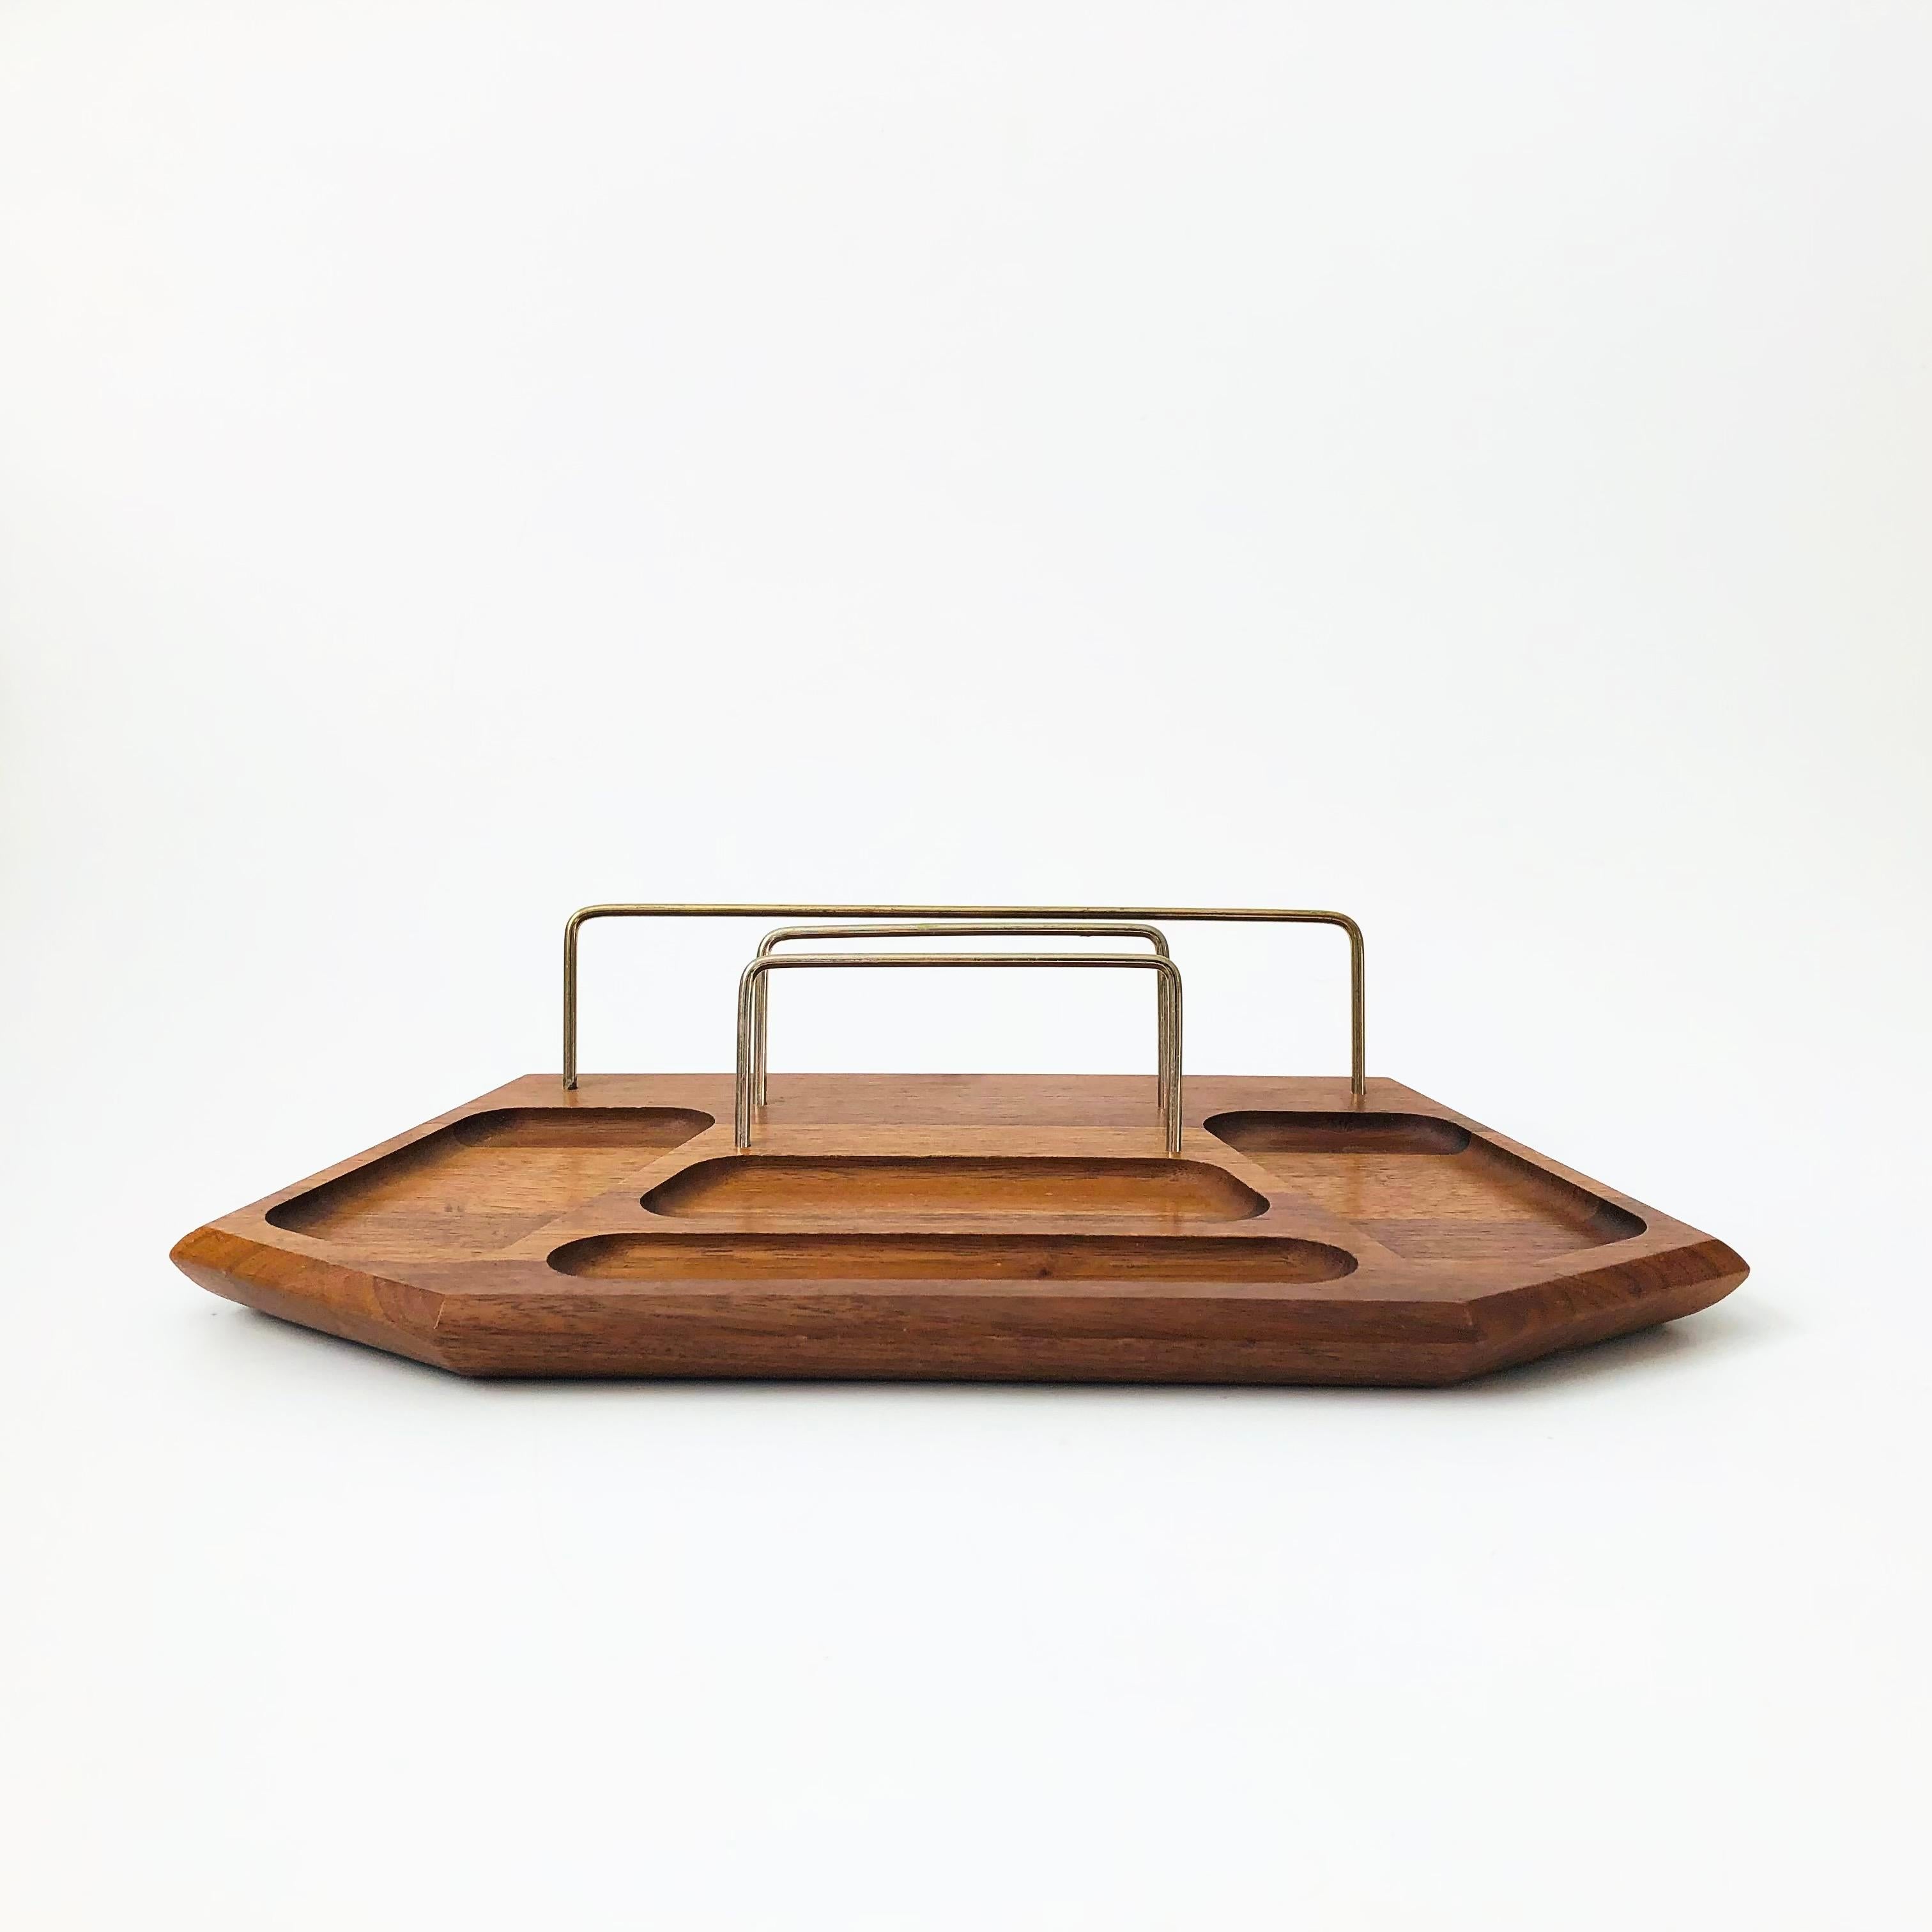 A vintage walnut valet to meet all your organizing needs. Features several inset areas for organizing small items and brass bars for holding paper. Unique faceted shape. A great organizational piece to keep in the office, bedroom, or entryway.

